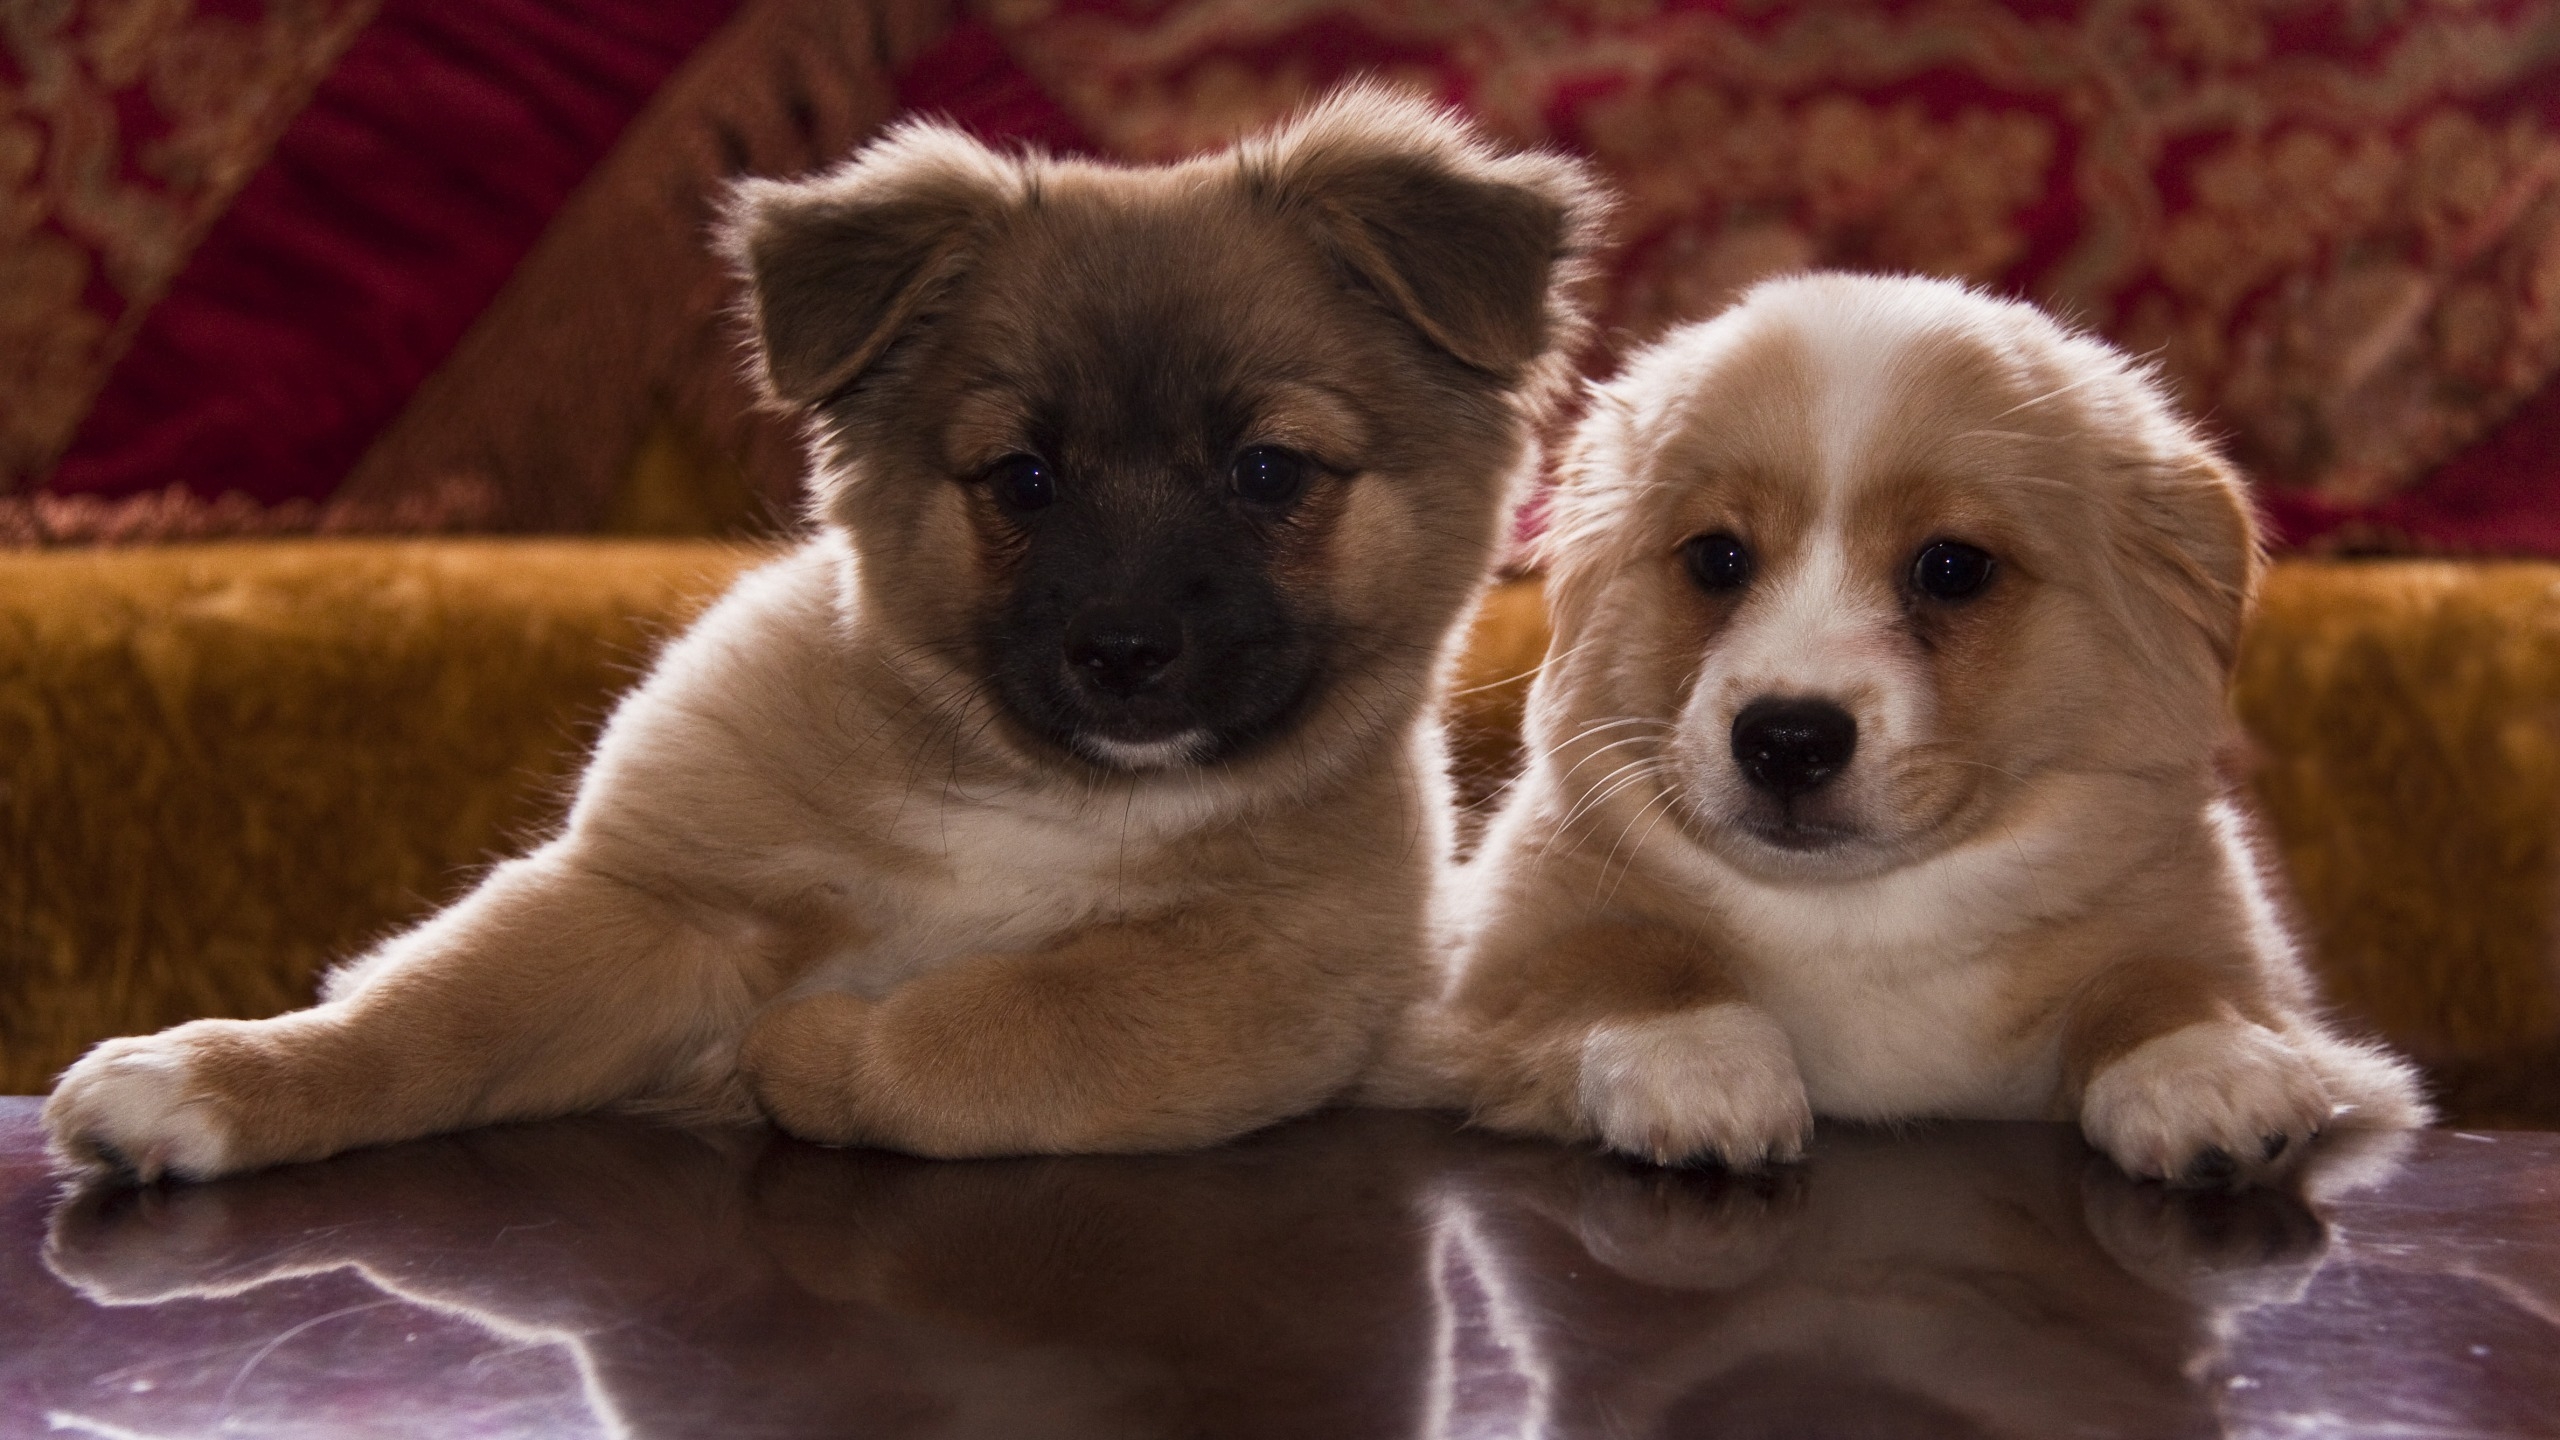 Cute Puppies for 2560x1440 HDTV resolution